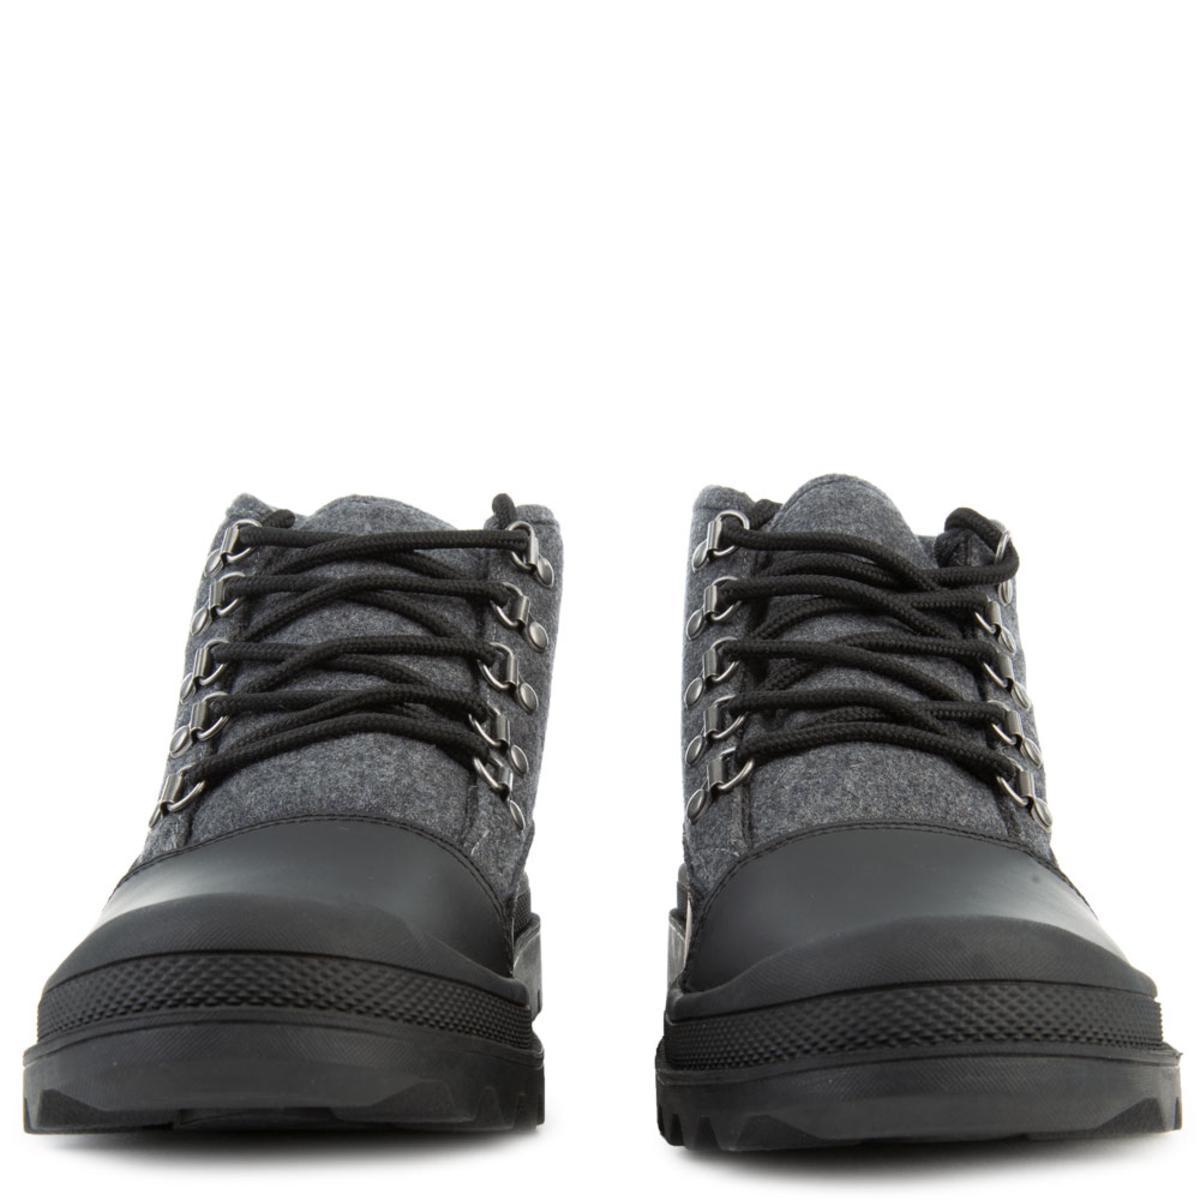 Cordova Boots in Black Wool w/ Leather